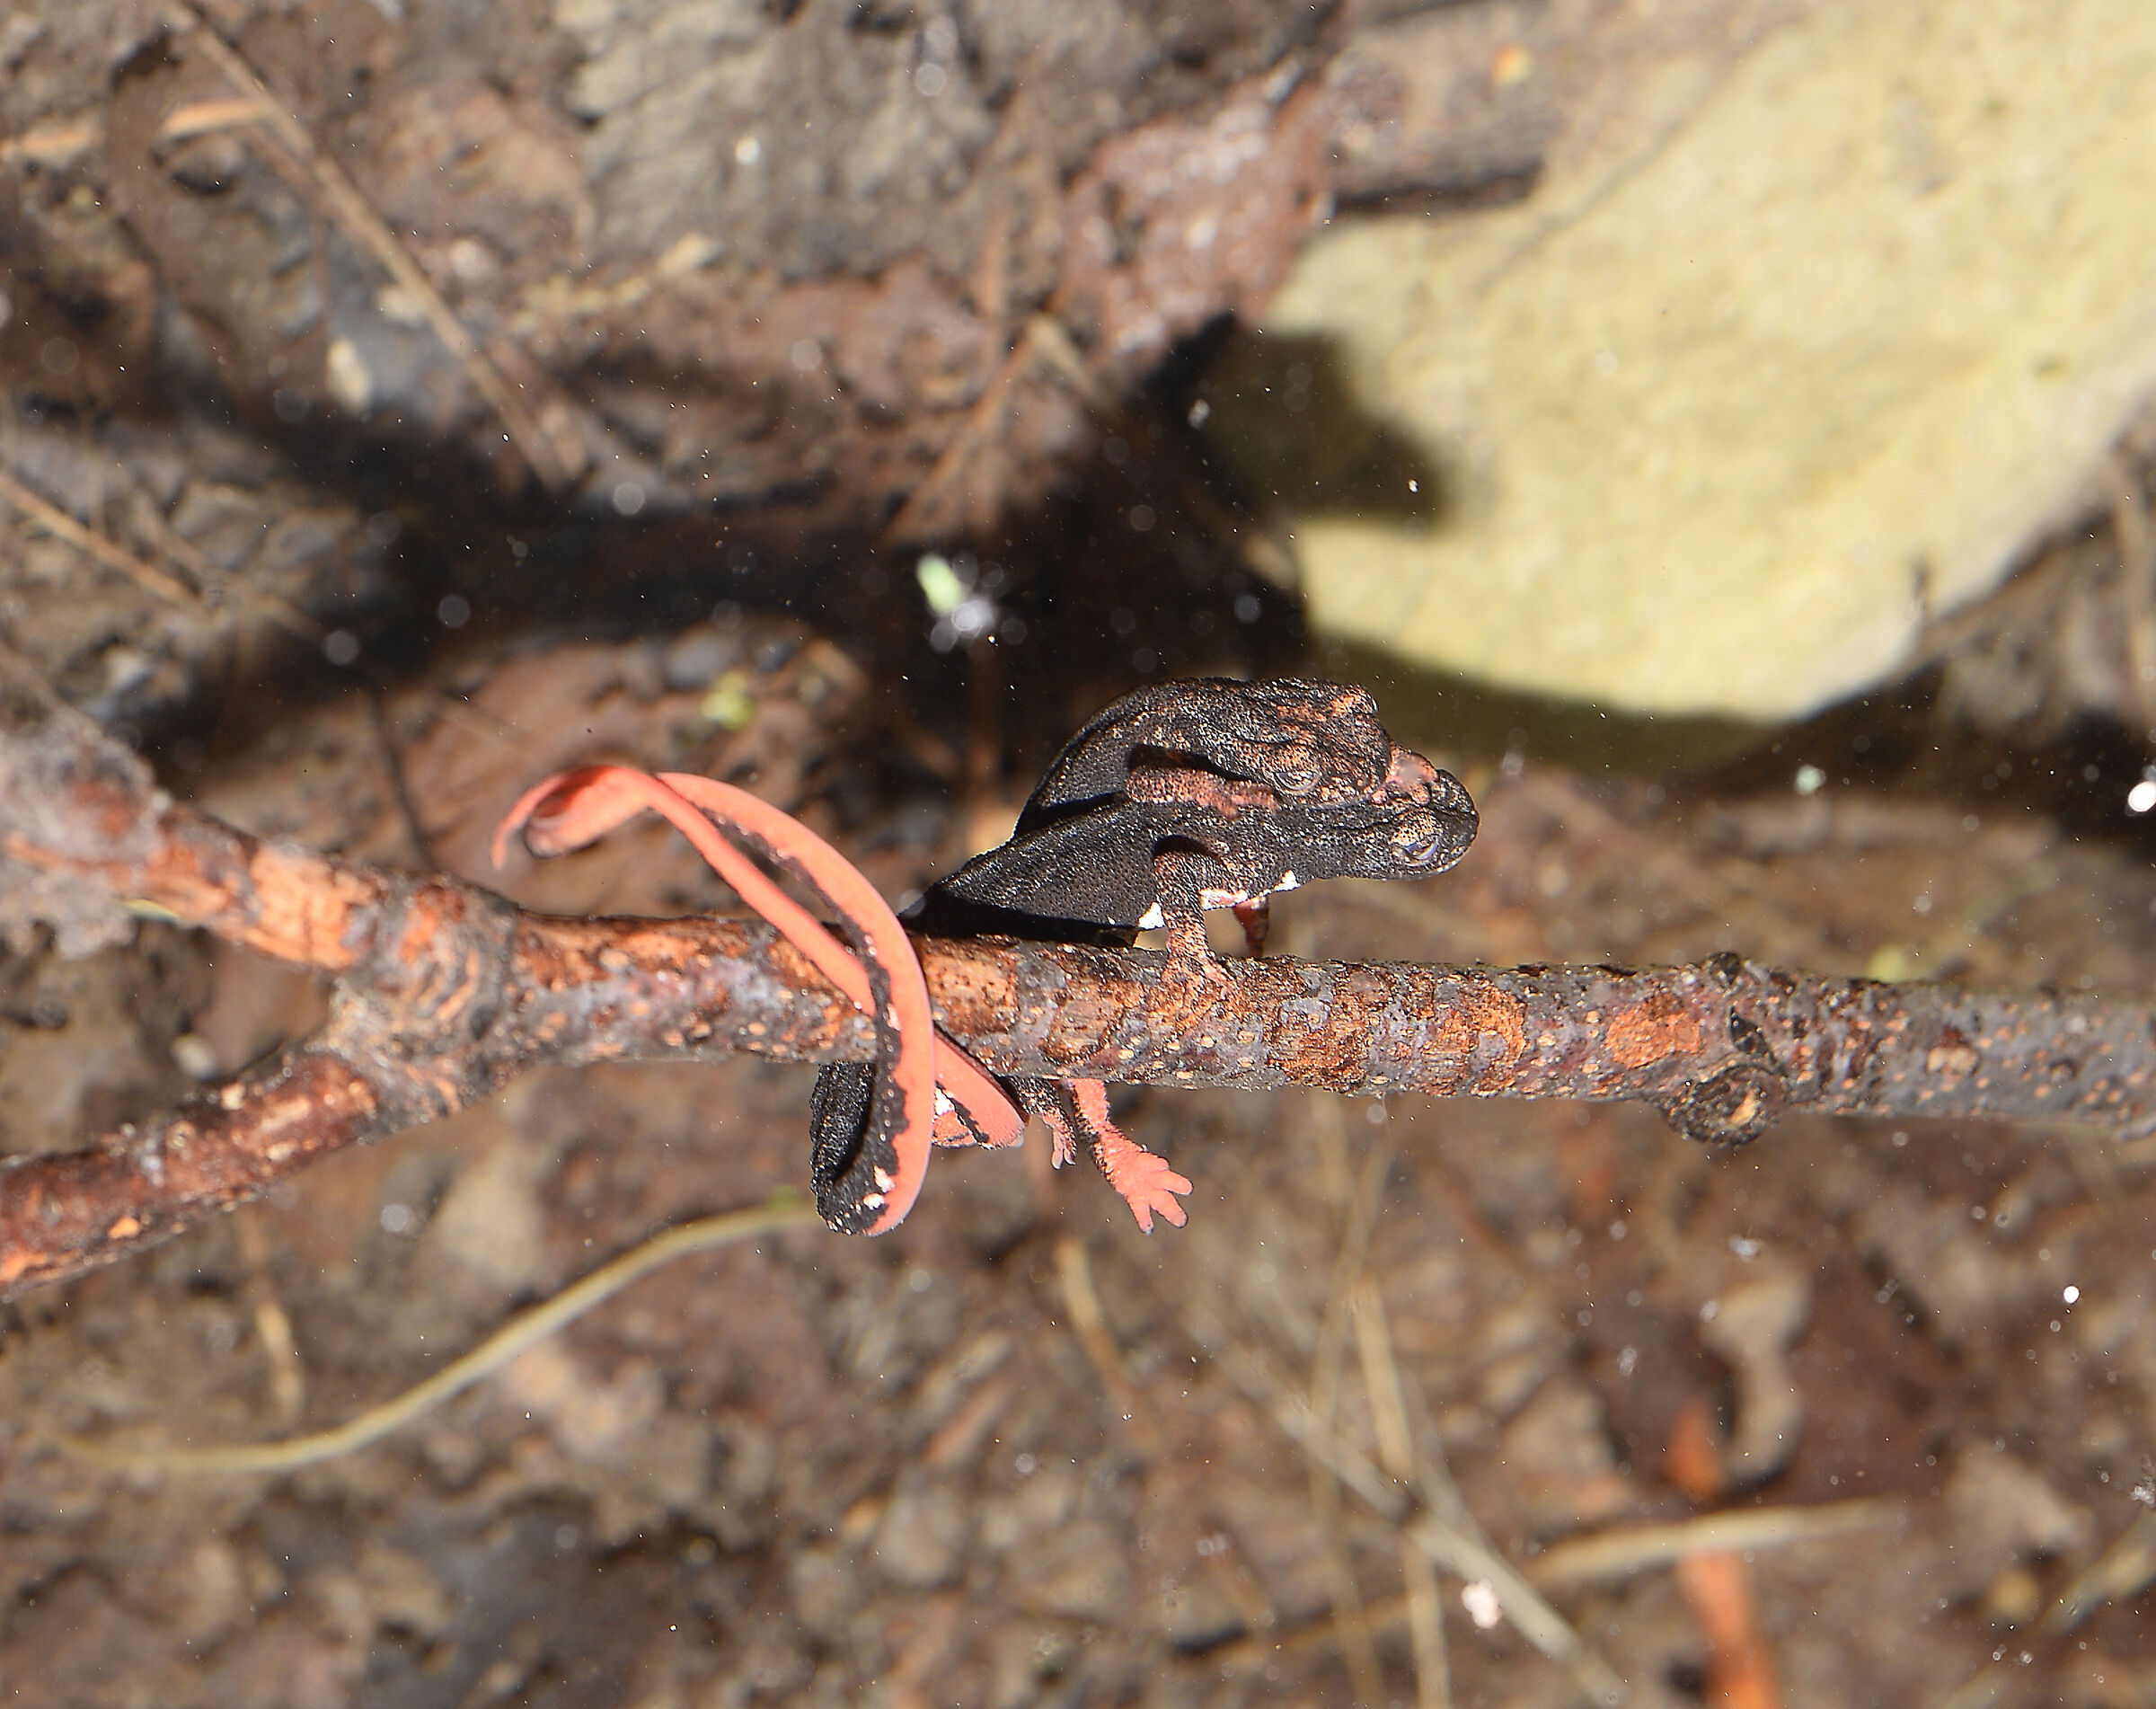 Spectacled salamander in deposition...